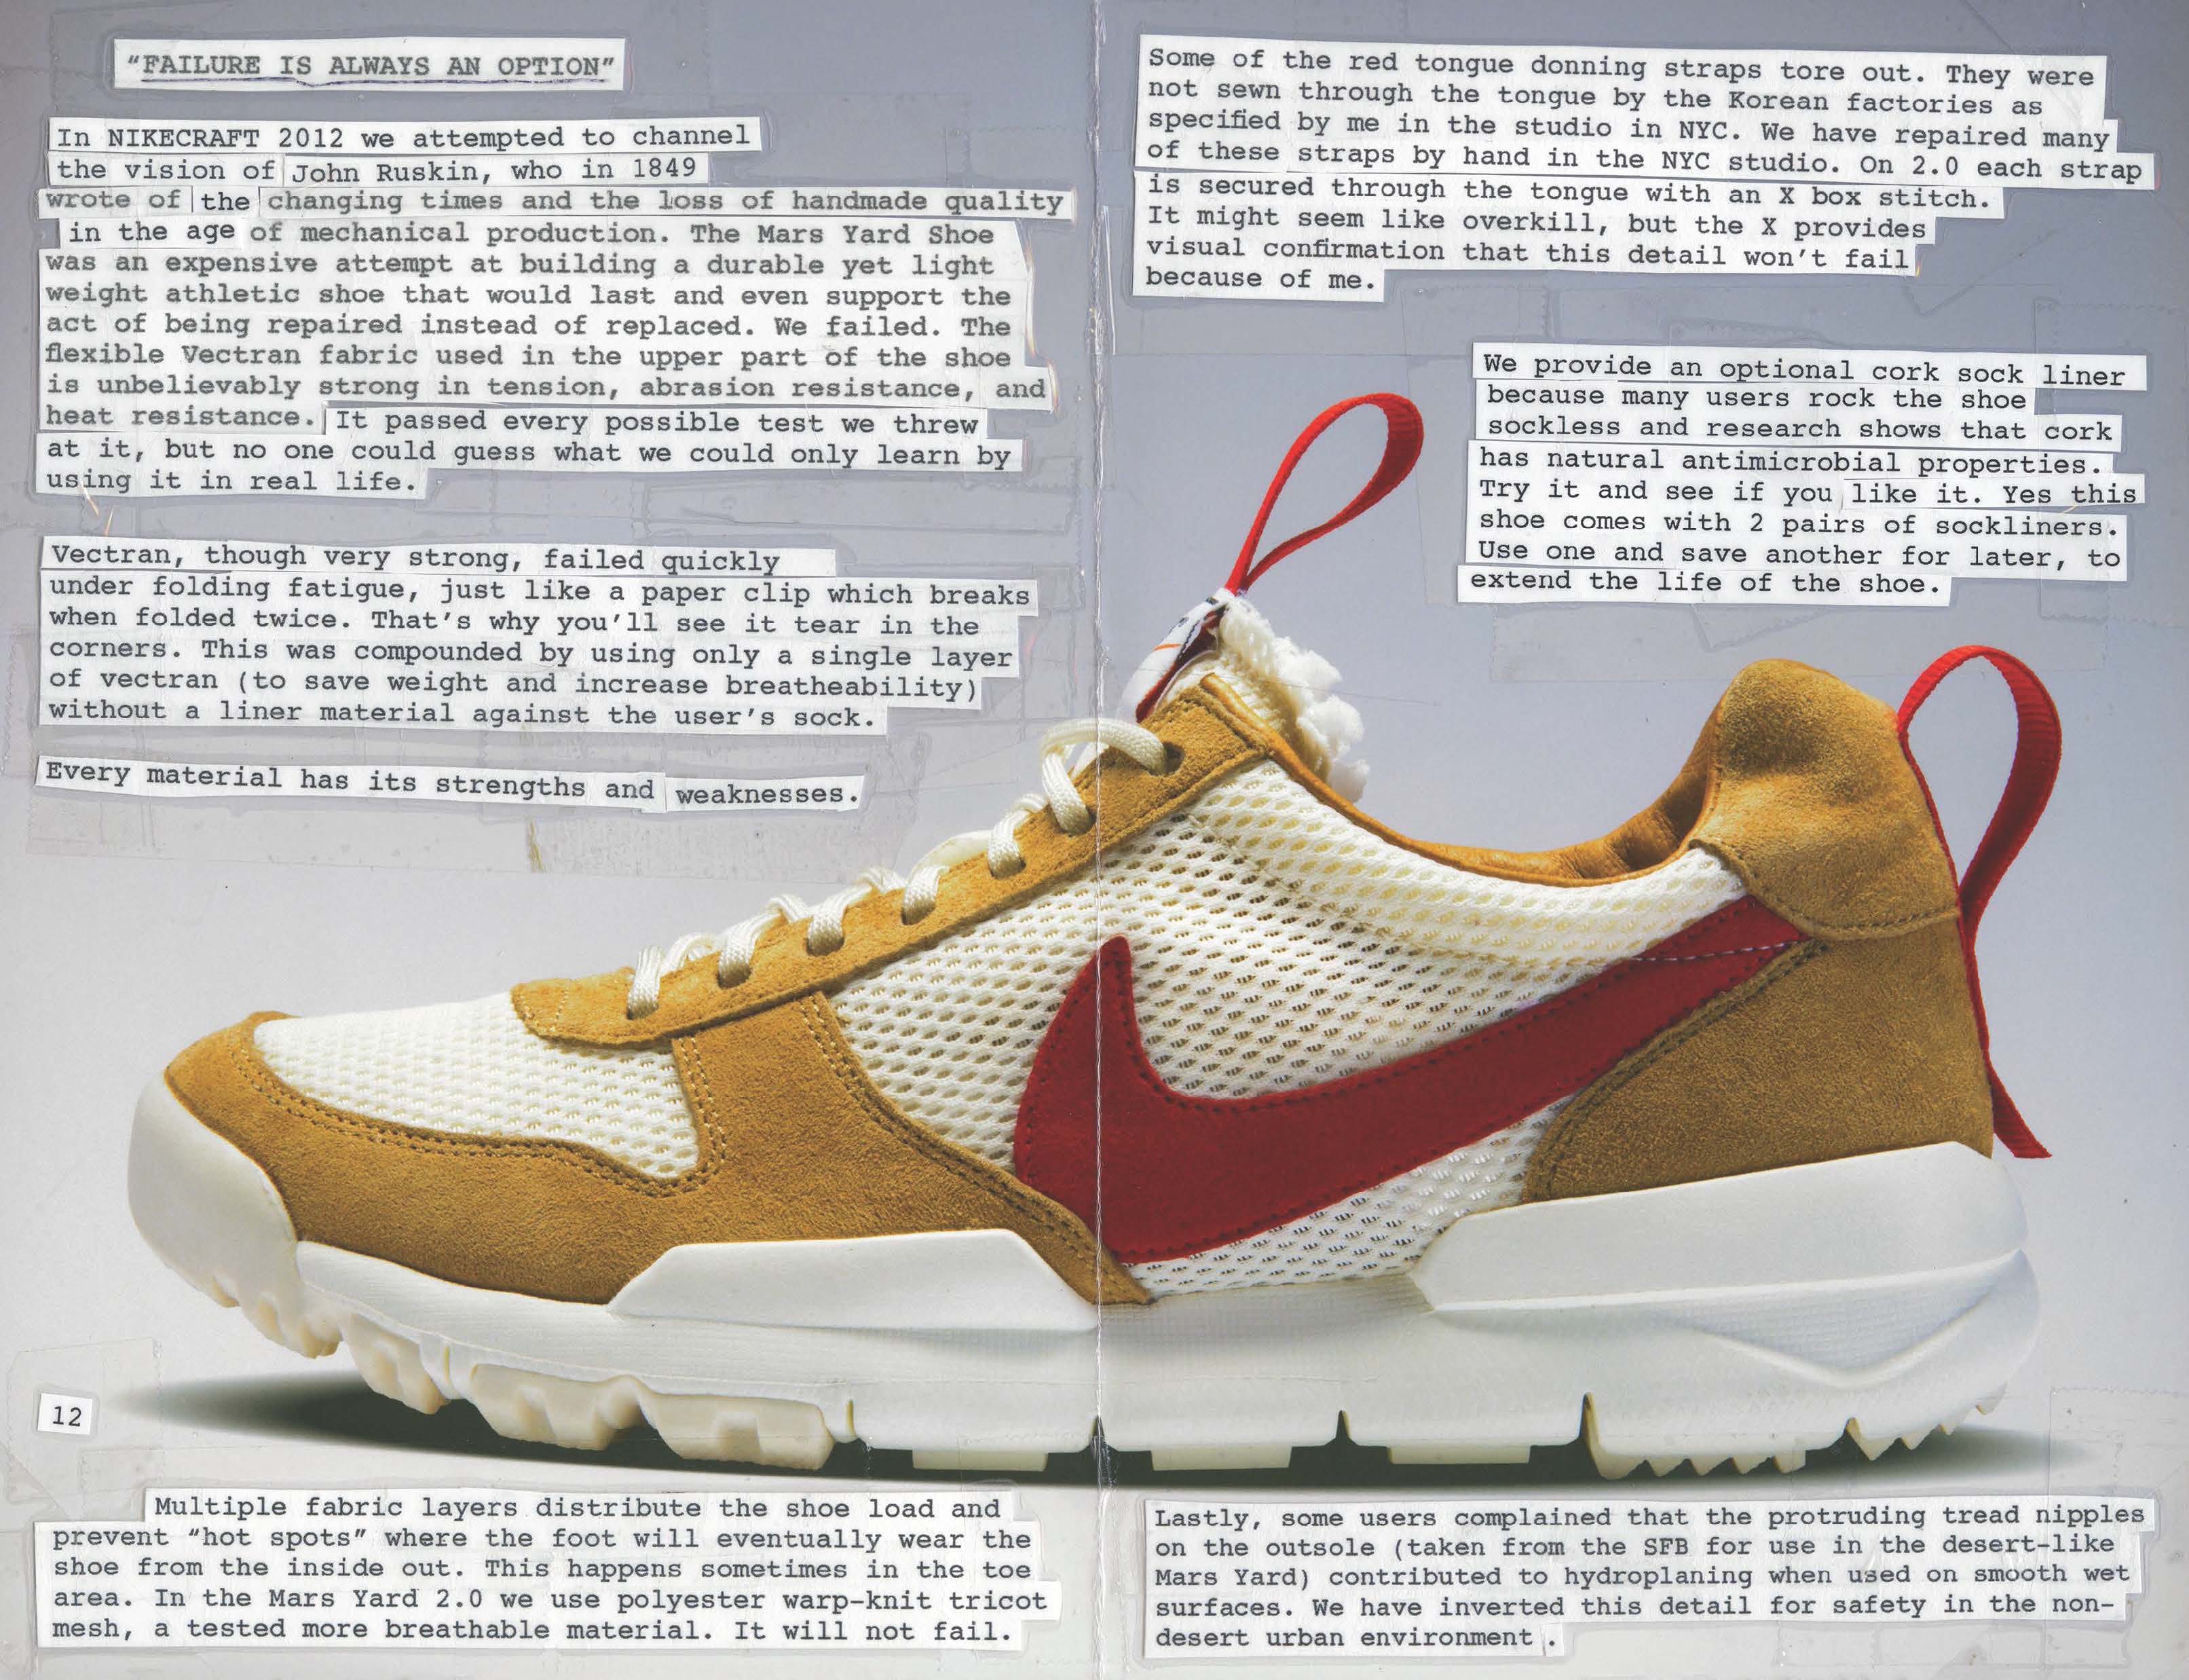 Bargain Buys: 20 Sneaker Steals Found In Vintage Eastbay Catalogs